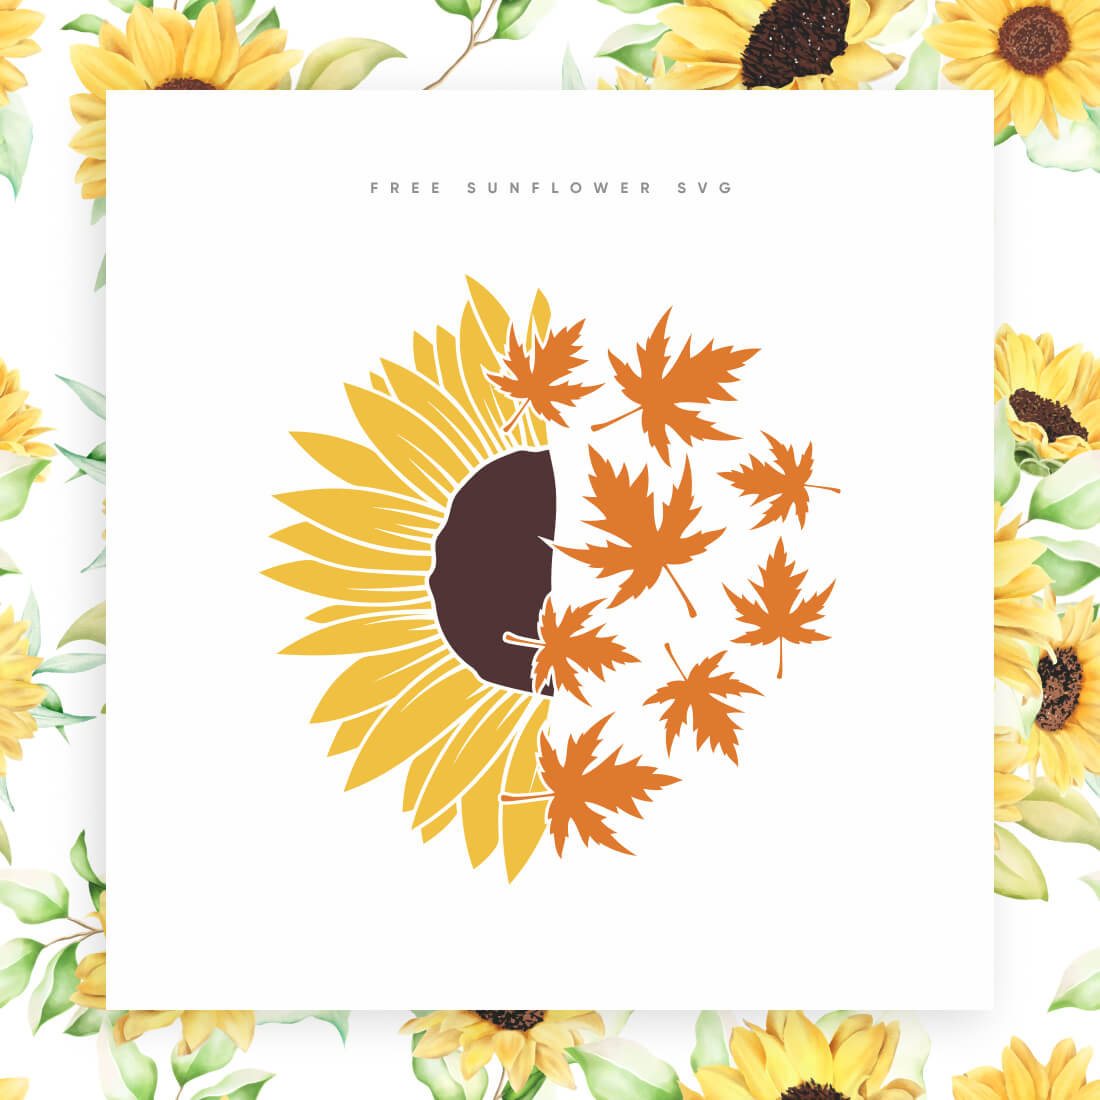 Free Sunflower SVG preview.